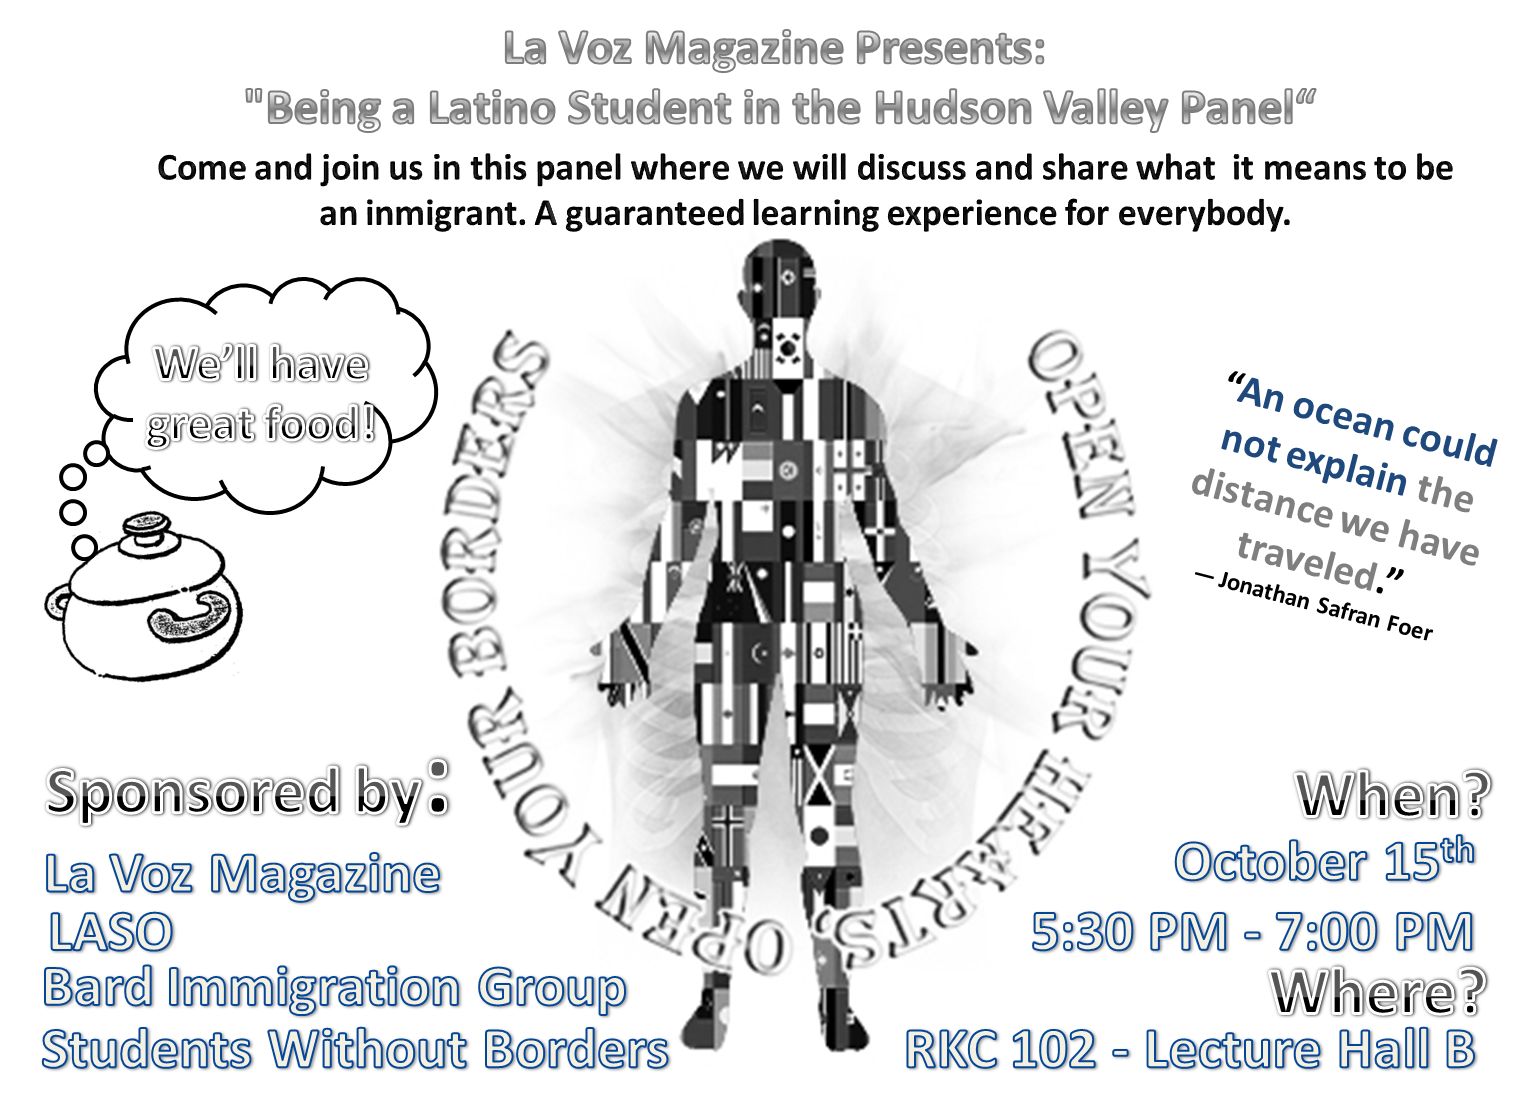 Being a Latino Student in the Hudson Valley